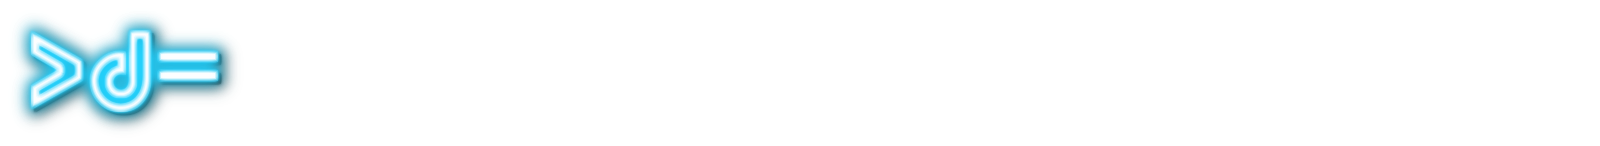 Greater Dan Or Equal To